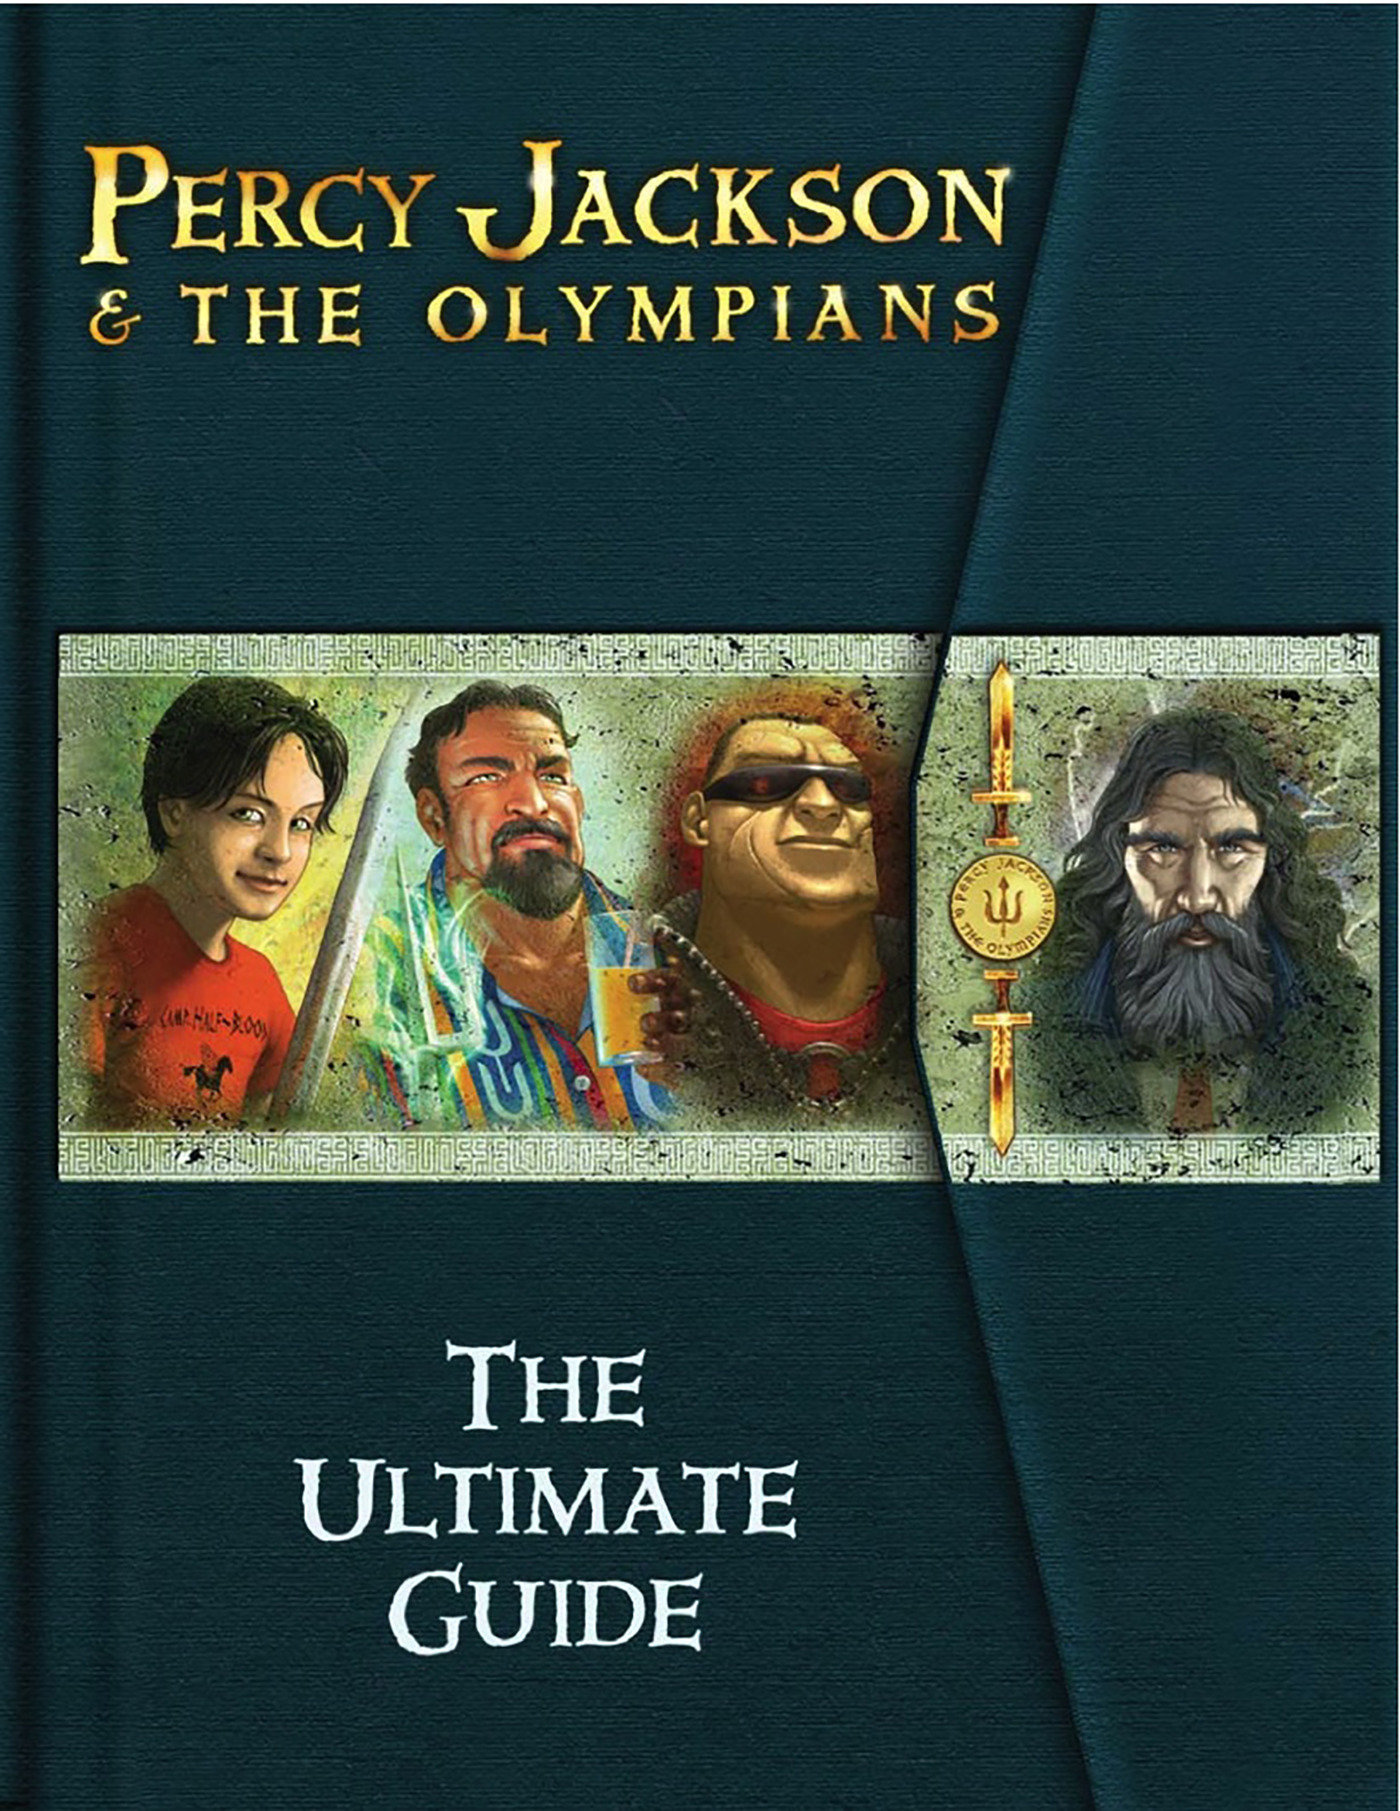 Percy Jackson and the Olympians: Ultimate Guide, The-Percy Jackson and the Olympians (Hardcover Book)